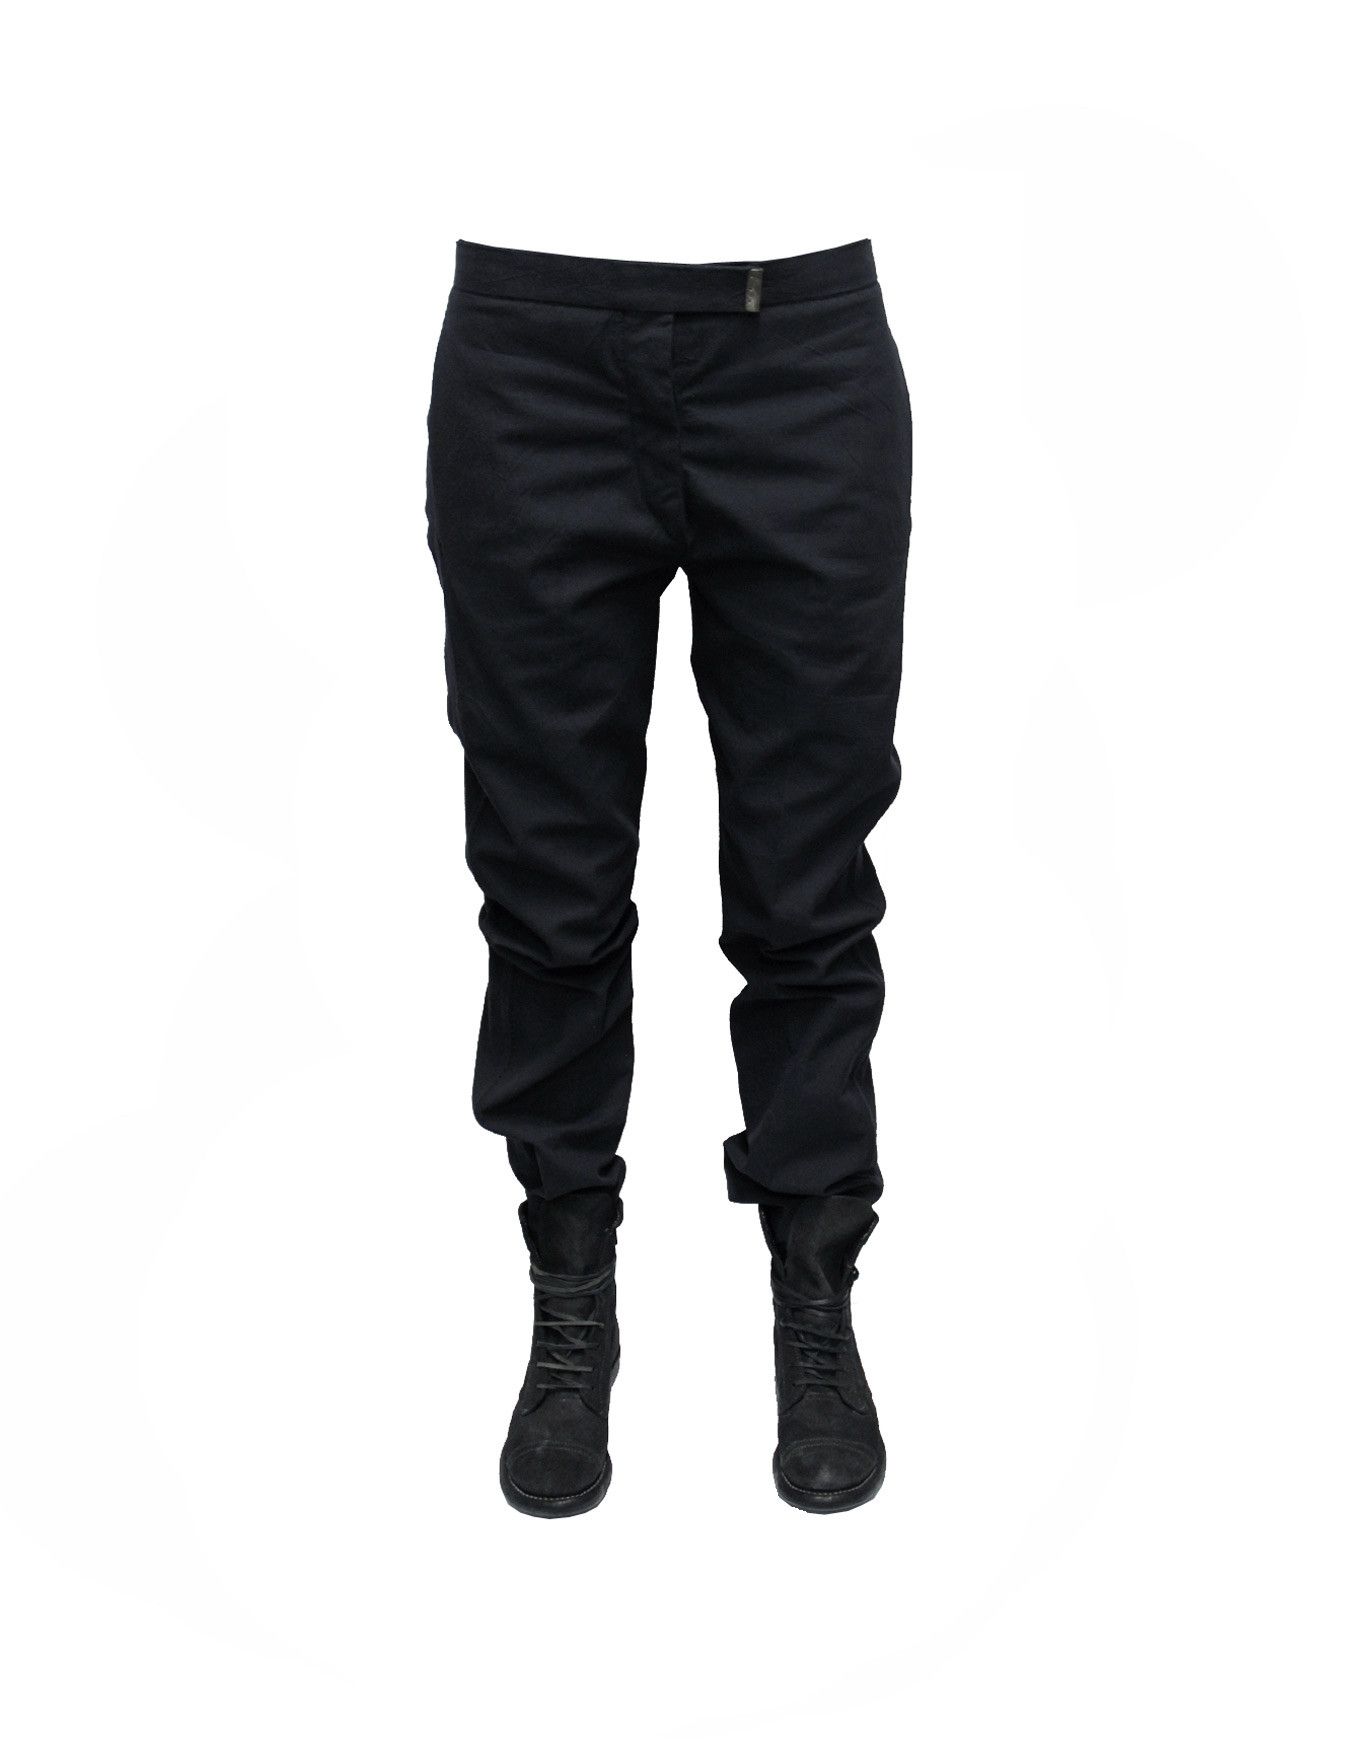 Carol Christian Poell Breadstick Trousers | Grailed